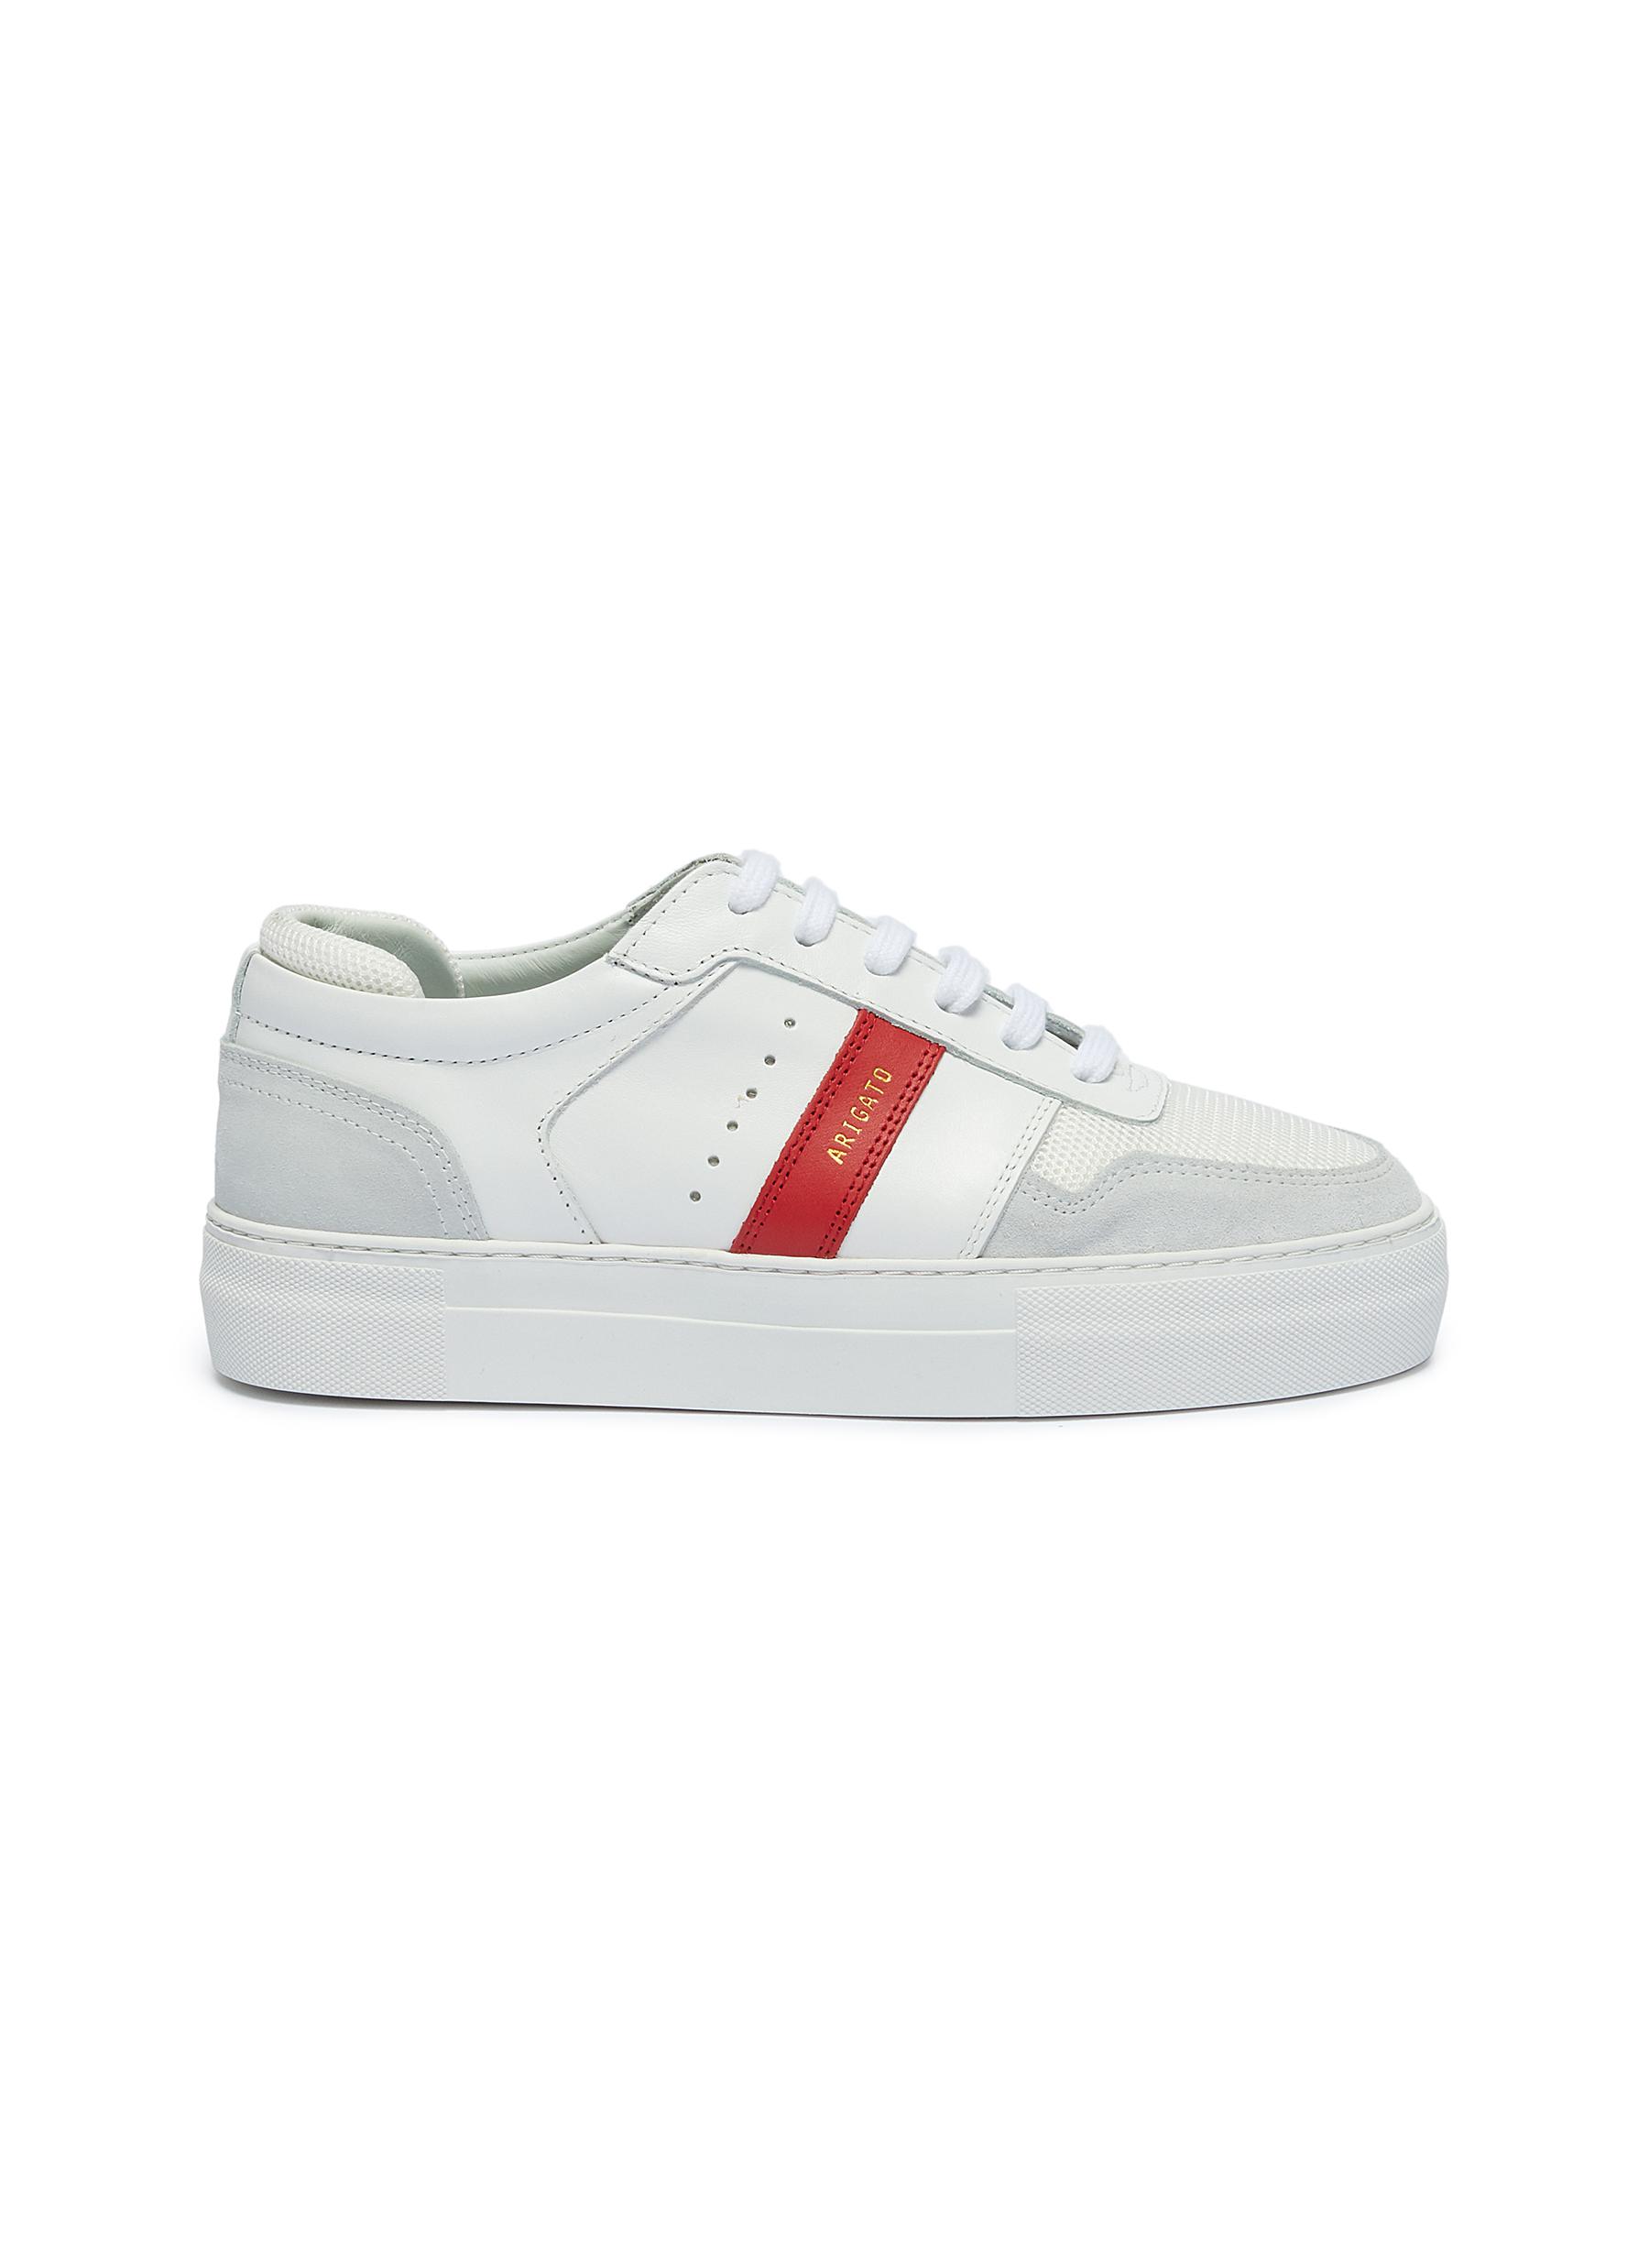 red and white platform sneakers